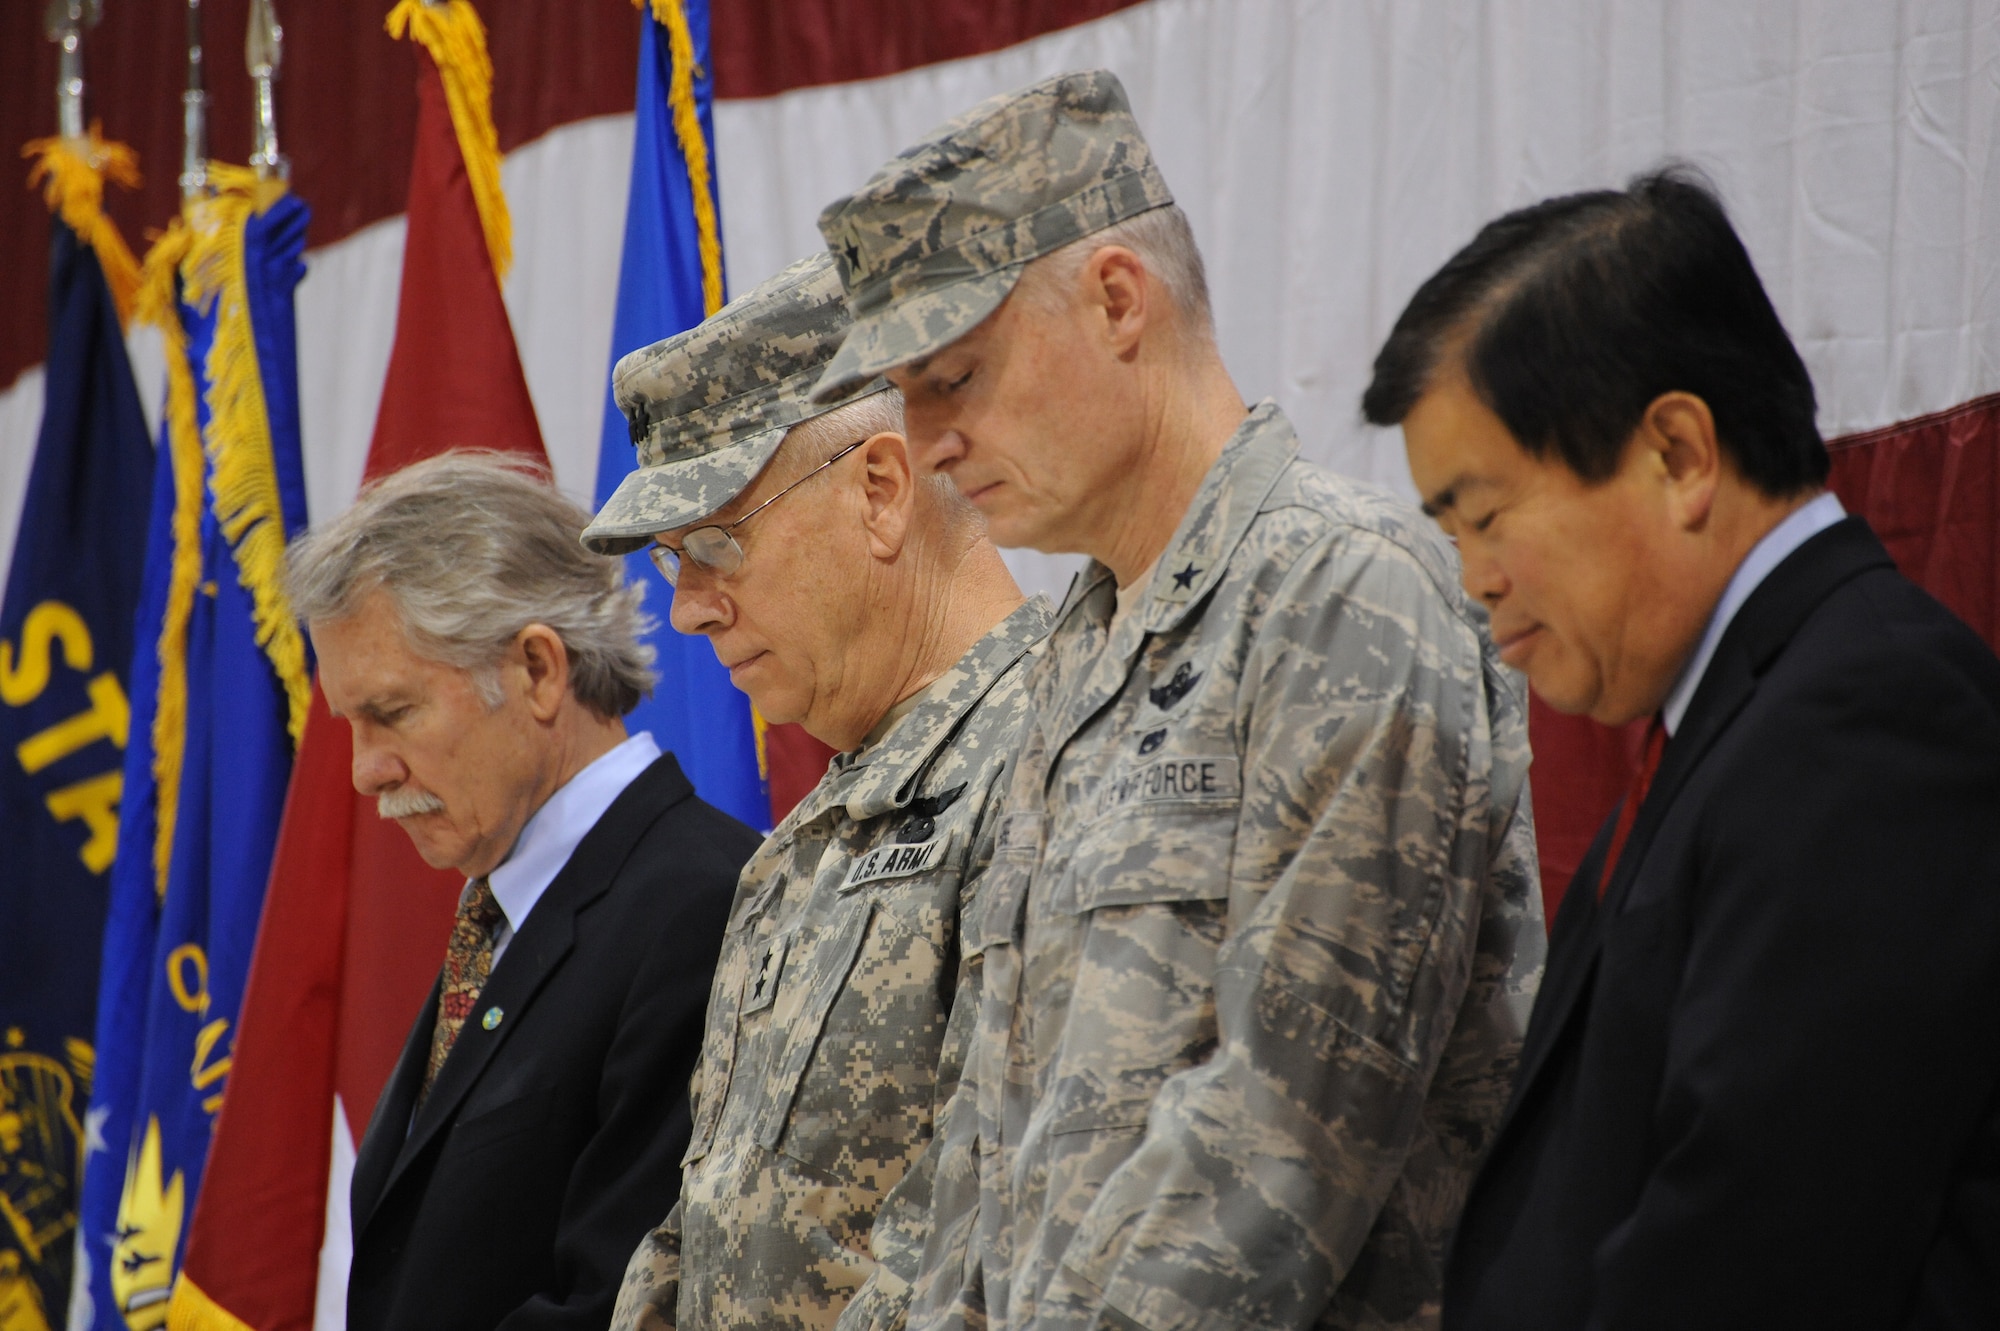 Oregon Governor John Kitzhaber, (Left to right) Maj. Gen. Raymond F. Rees, Adjutant General, Oregon, Brig. Gen. Steven Gregg, Commander of the Oregon Air National Guard, and Congressman David Wu (OR-District 1), pause for reflection during the Invocation of the 116th Air Control Squadron mobilization ceremony held at the Portland Air National Guard Base, Portland, Ore., on March 4, 2011. (U.S. Air Force photograph by Tech. Sgt. John Hughel, 142nd Fighter Wing Public Affairs)